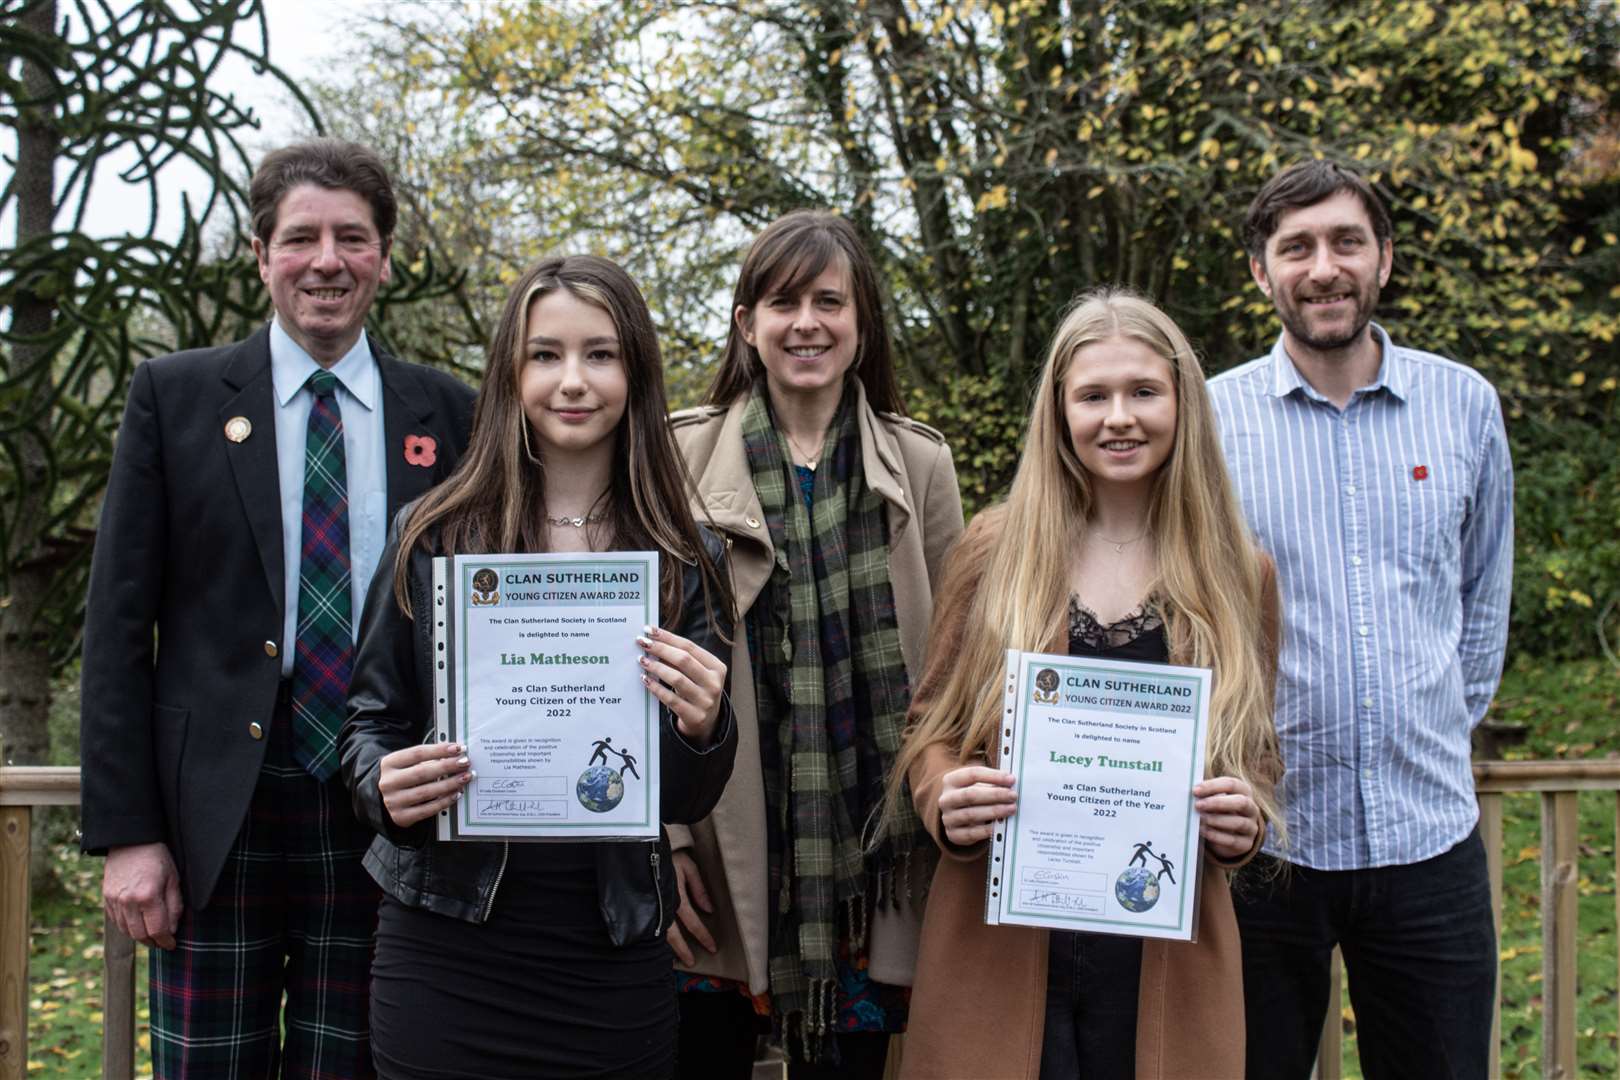 Last year's winners (front, from left) Lia Matheson and Lacey Tunstall with (back) Mark Sutherland-Fisher, president of the Clan Sutherland Society in Scotland, Dr Lady Elizabeth Costin, of the clan chief’s family, and Northern Times content editor John Davidson.